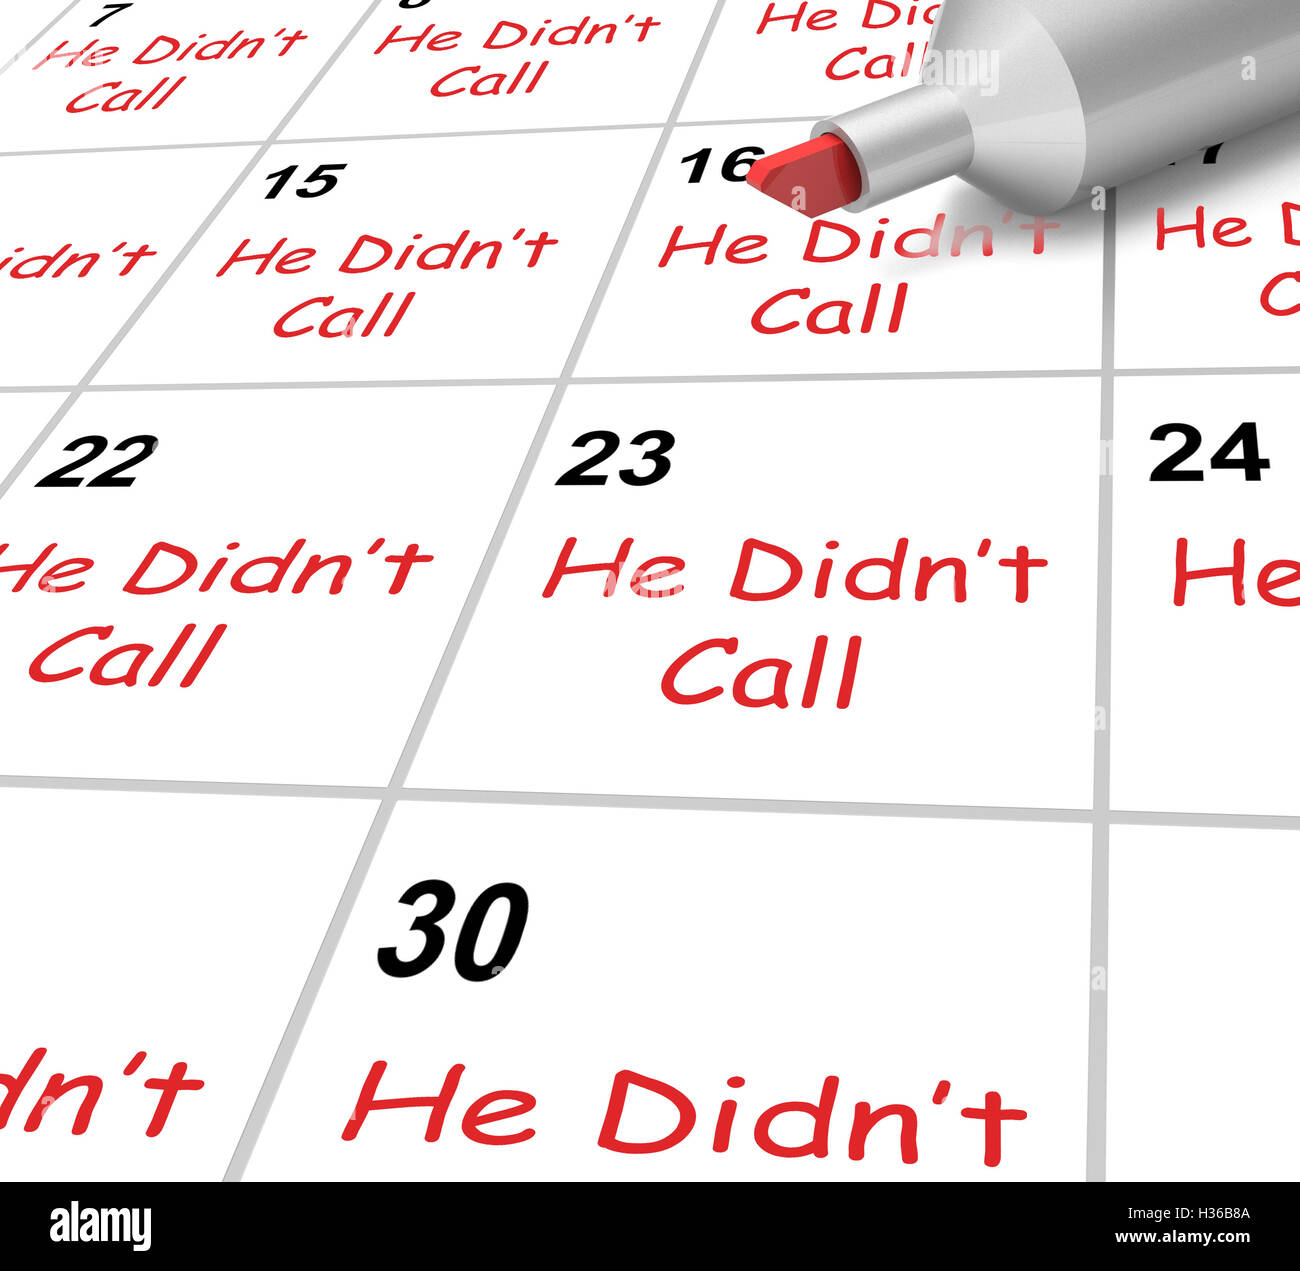 He Didnt Call Calendar Shows No Calls From Love Interest Stock Photo